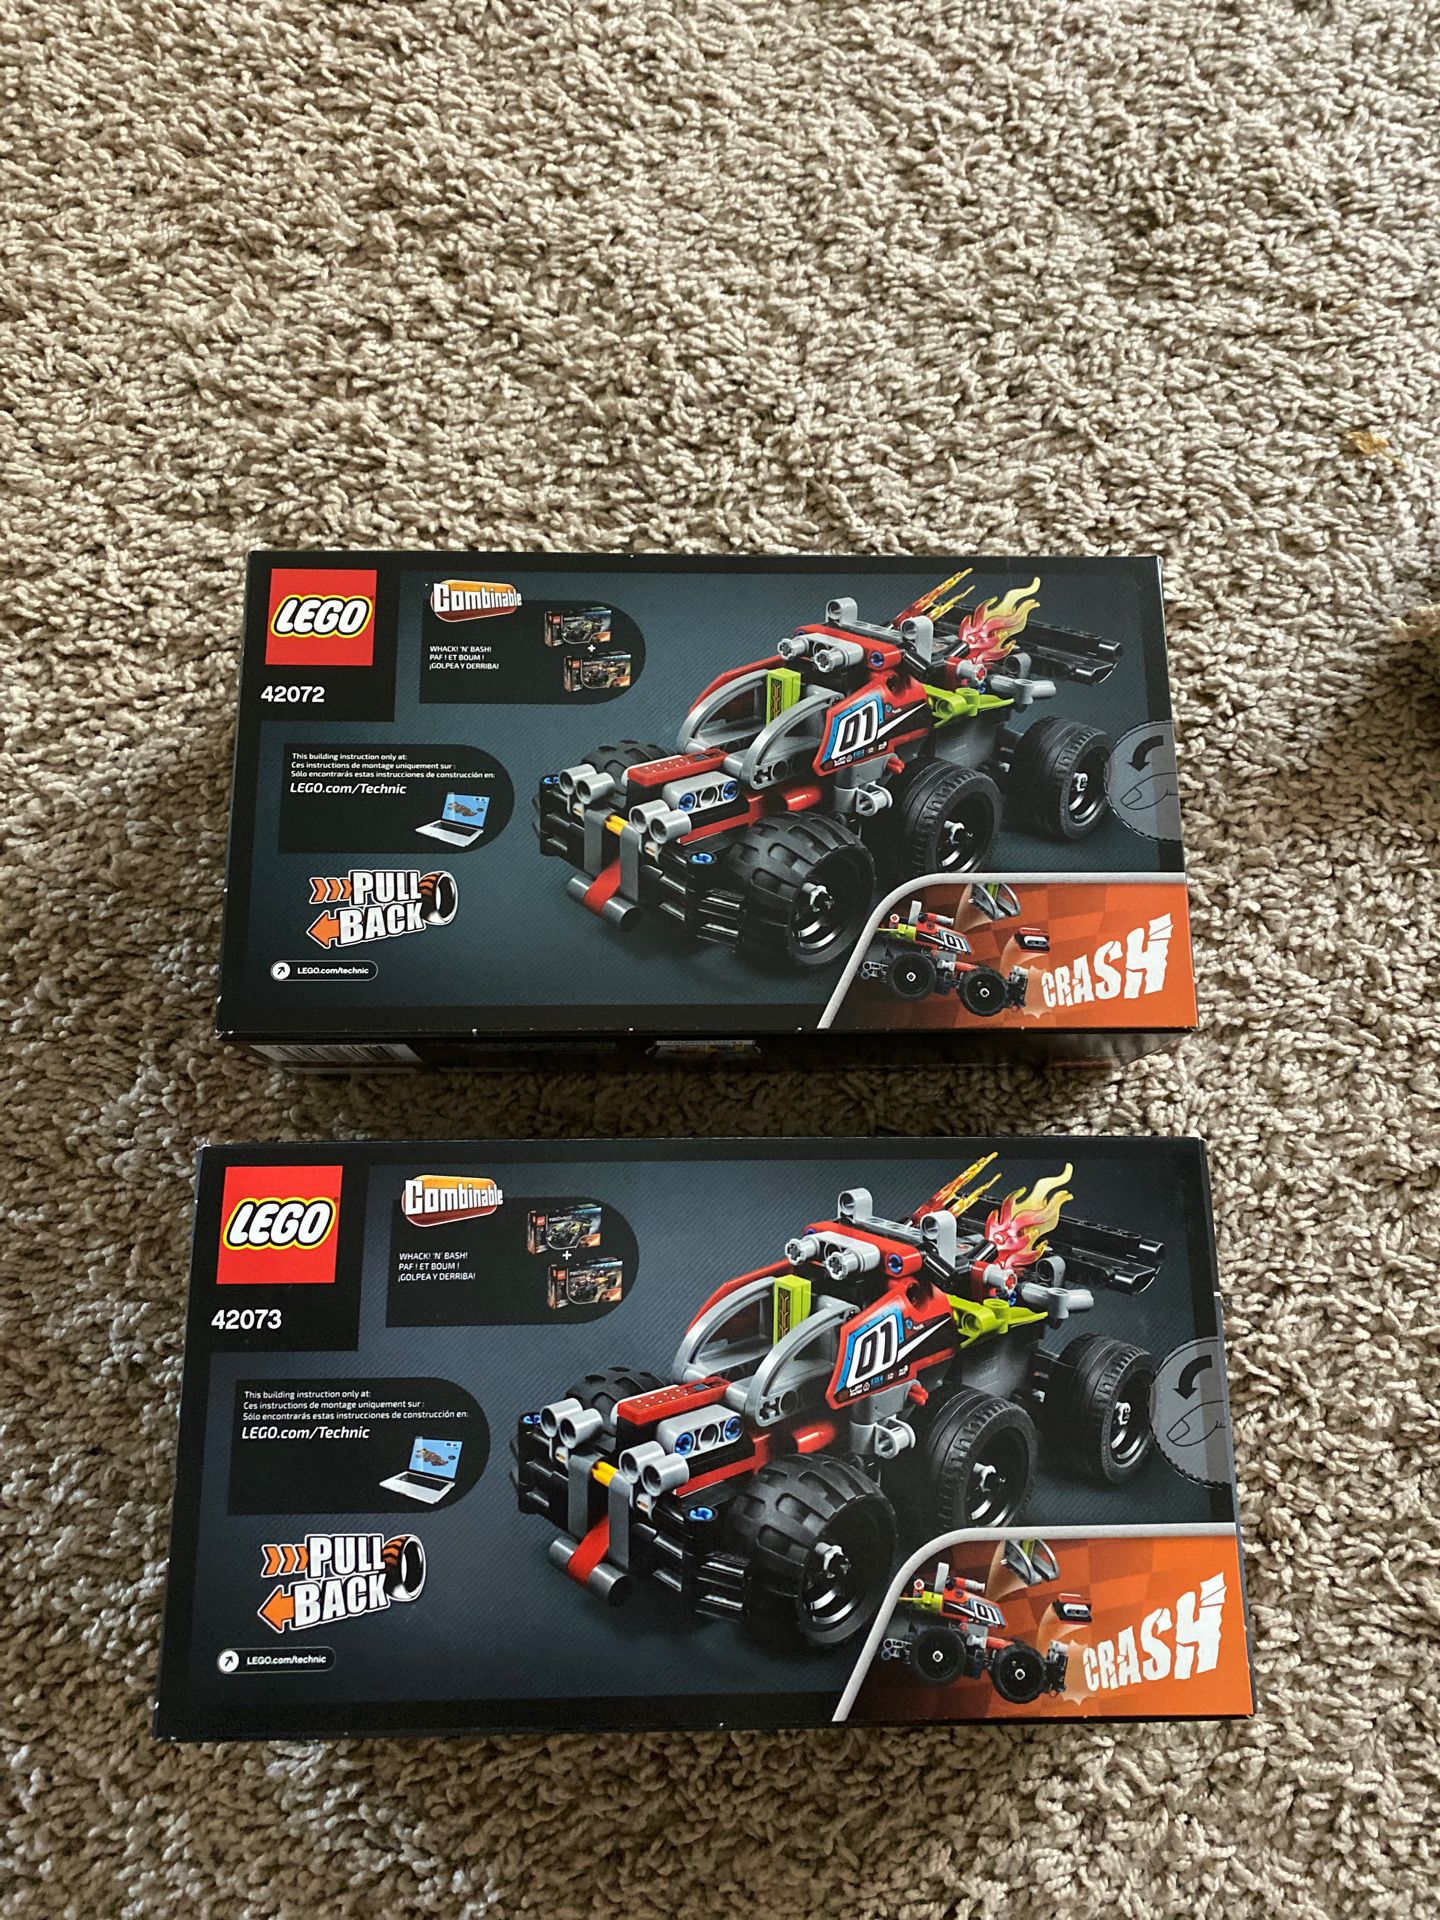 LEGO TECHNIC 42072 Bash for Sale in Sugar Land, TX - OfferUp